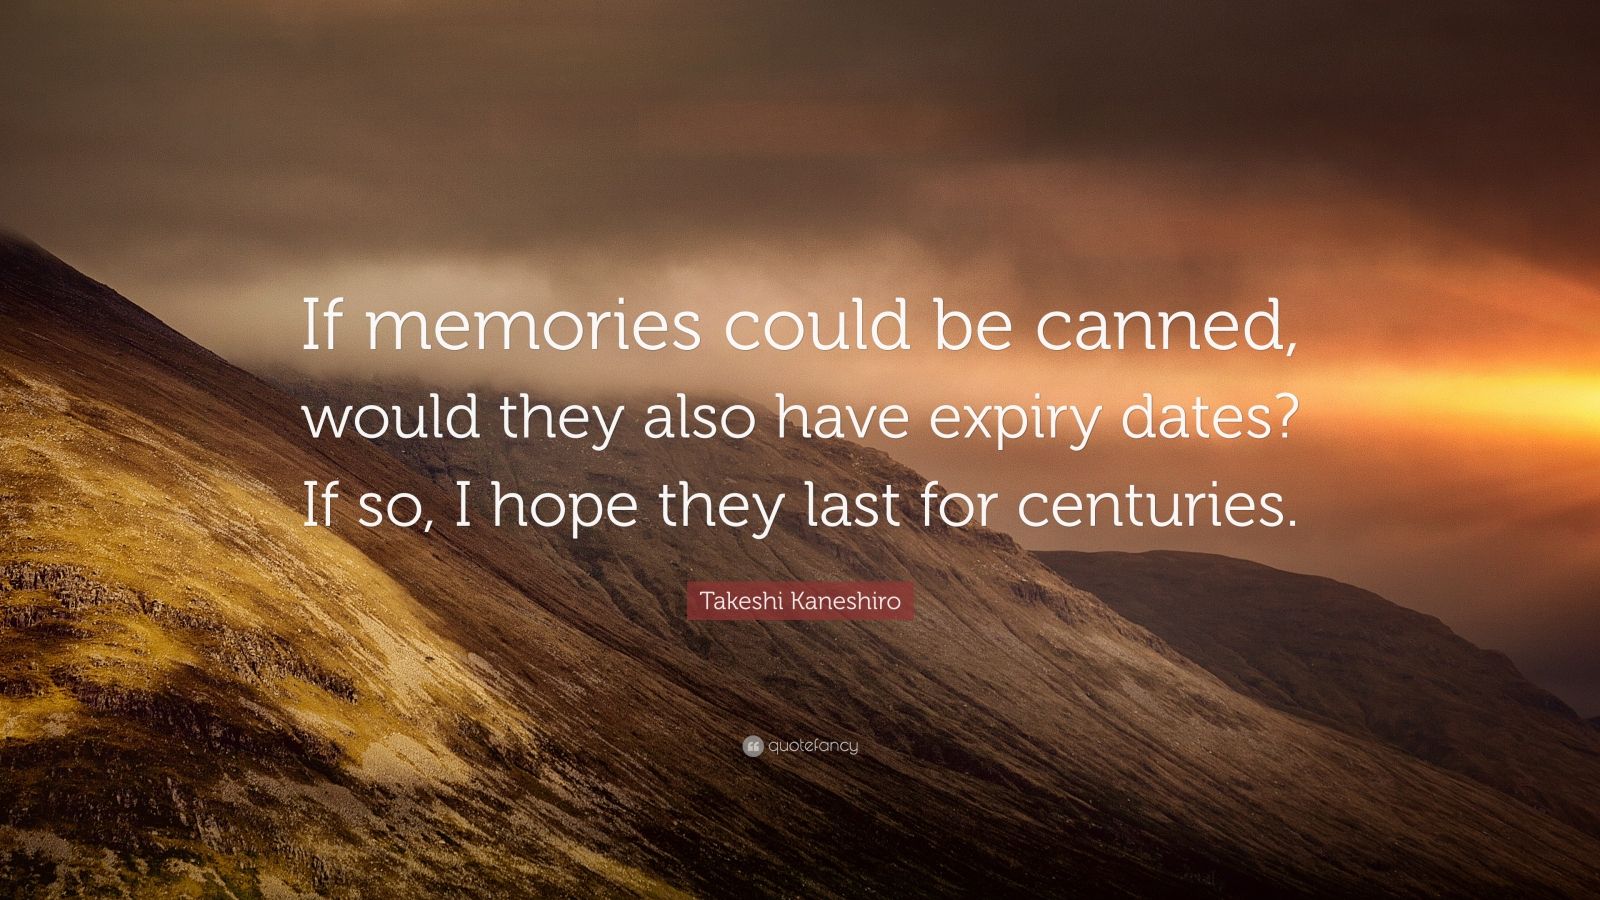 Takeshi Kaneshiro Quote: “If memories could be canned, would they also ...